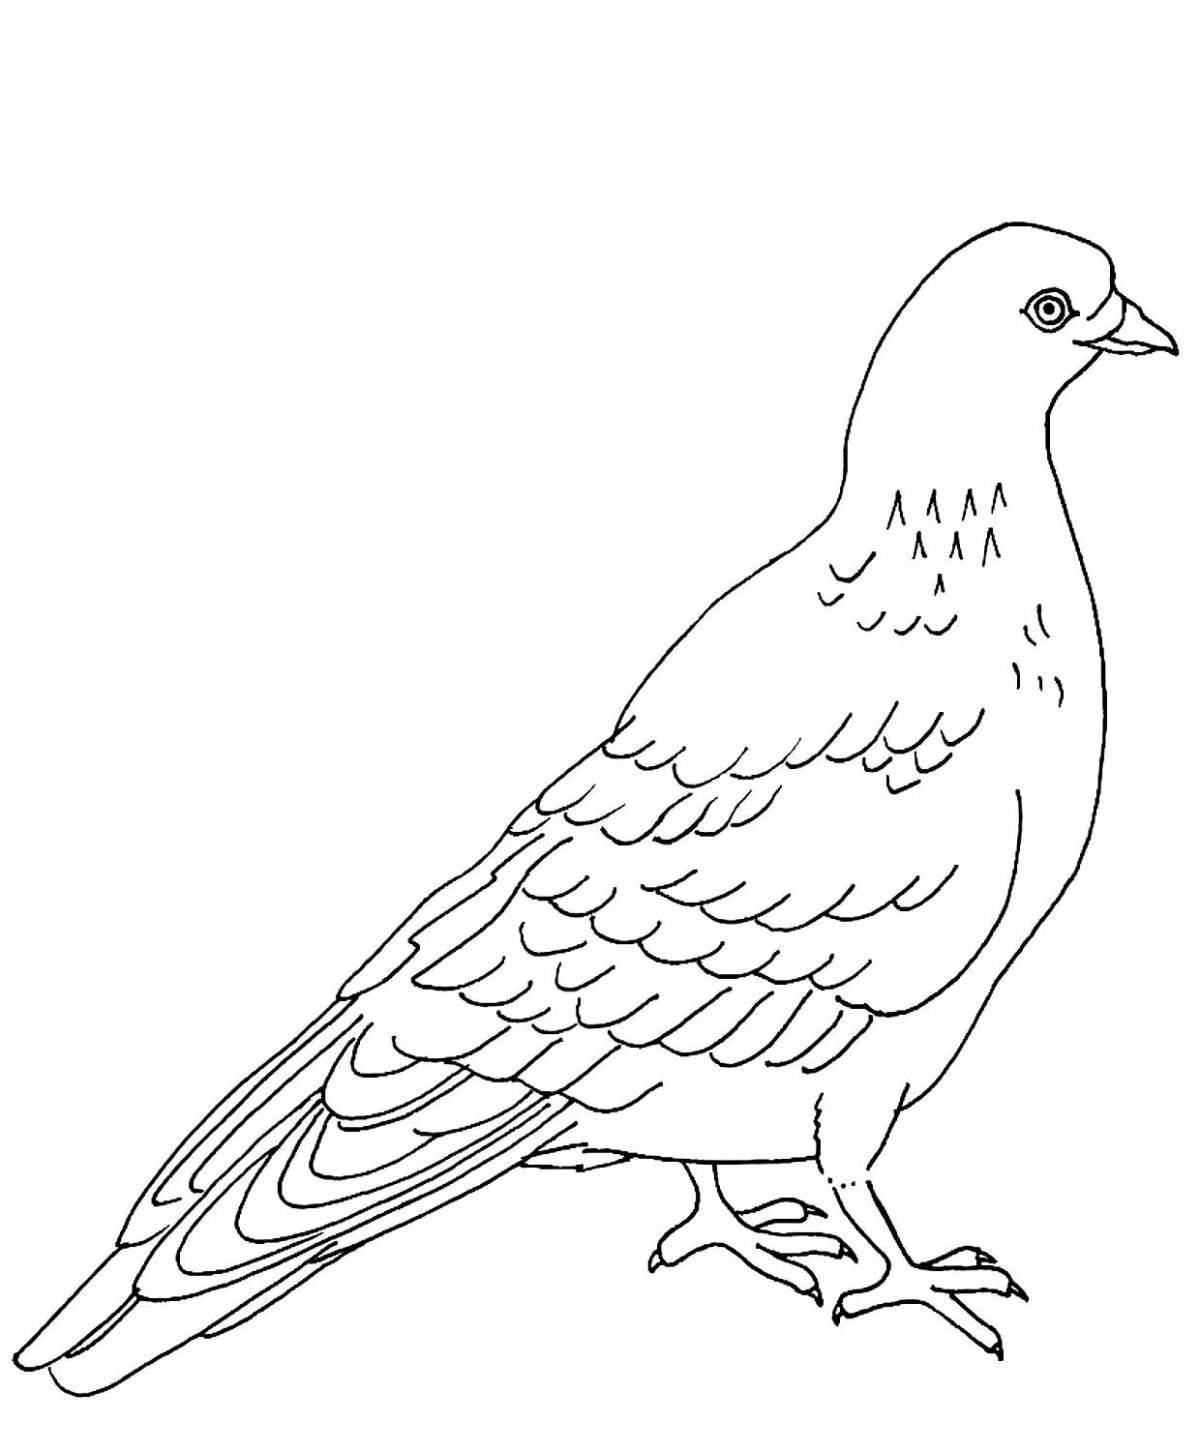 Great dove coloring book